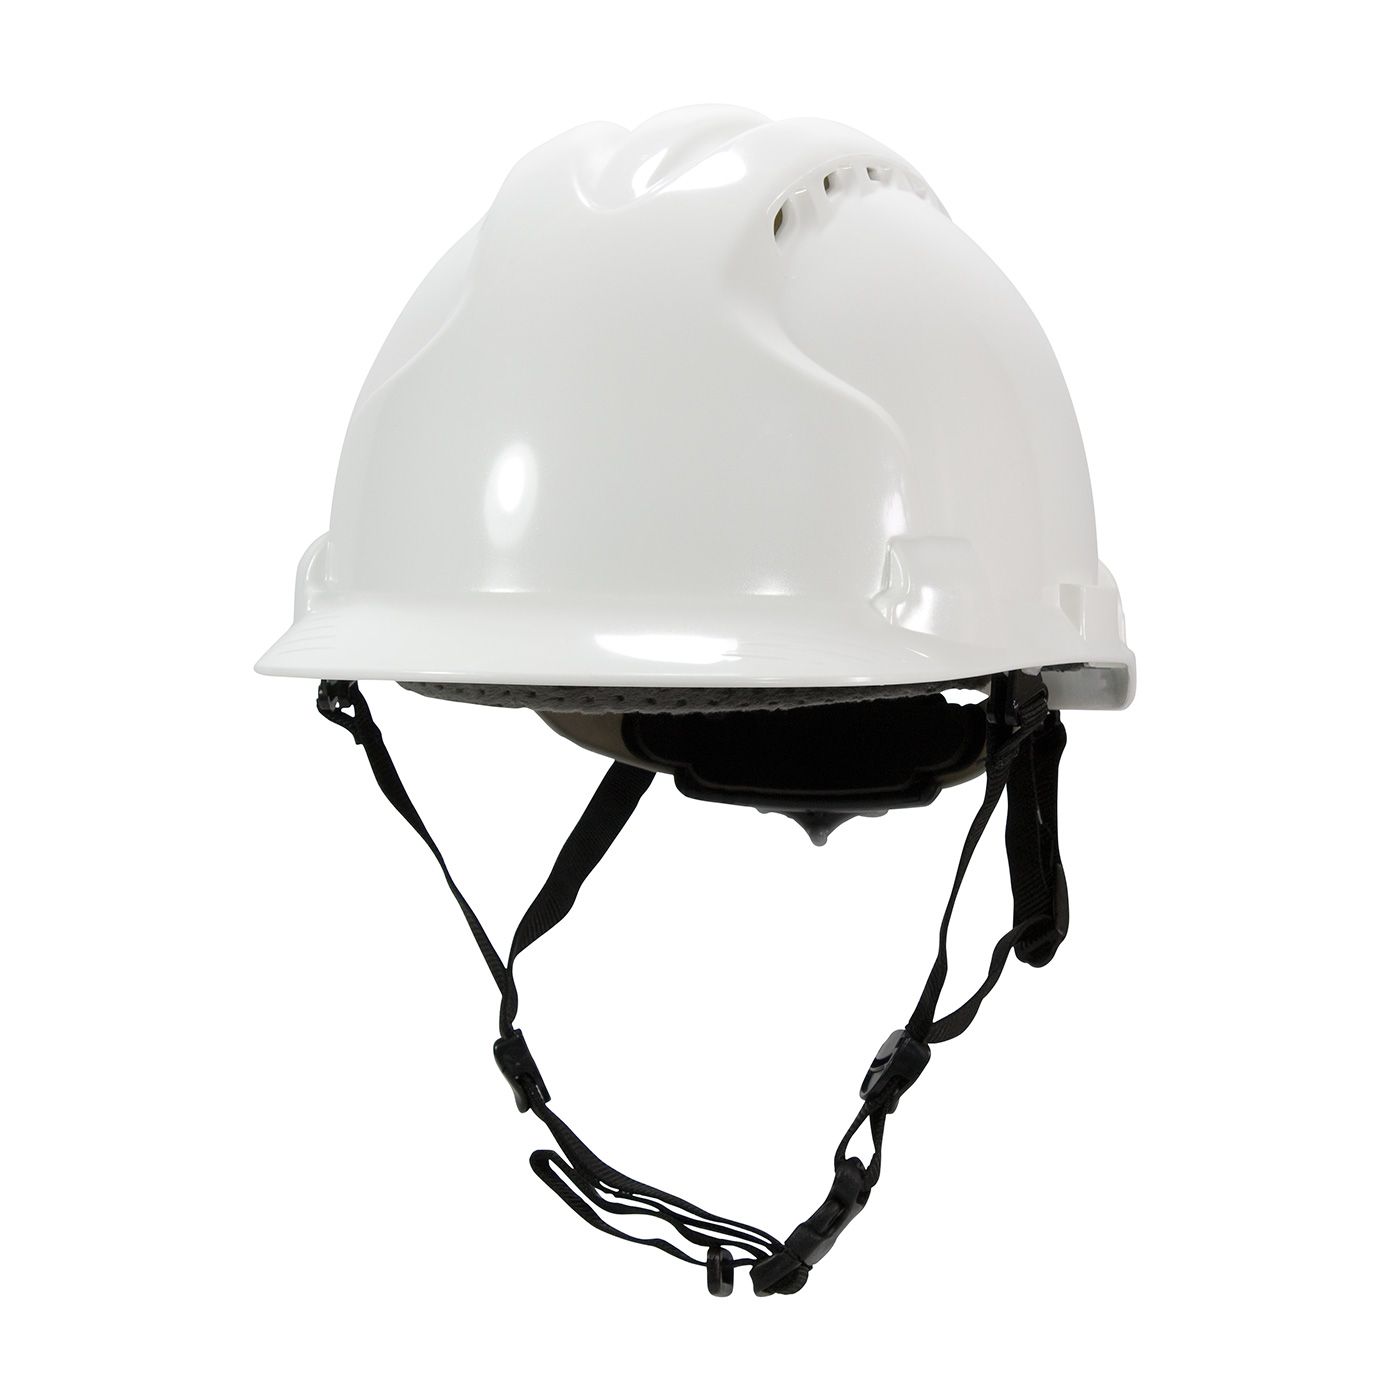 PIP® MK8 Evolution® 280-AHS240V-50 Vented, Type II Linesman Hard Hat with HDPE Shell, EPS Impact Liner, Polyester Suspension, Wheel Ratchet Adjustment and 4-Point Chin Strap, Blue